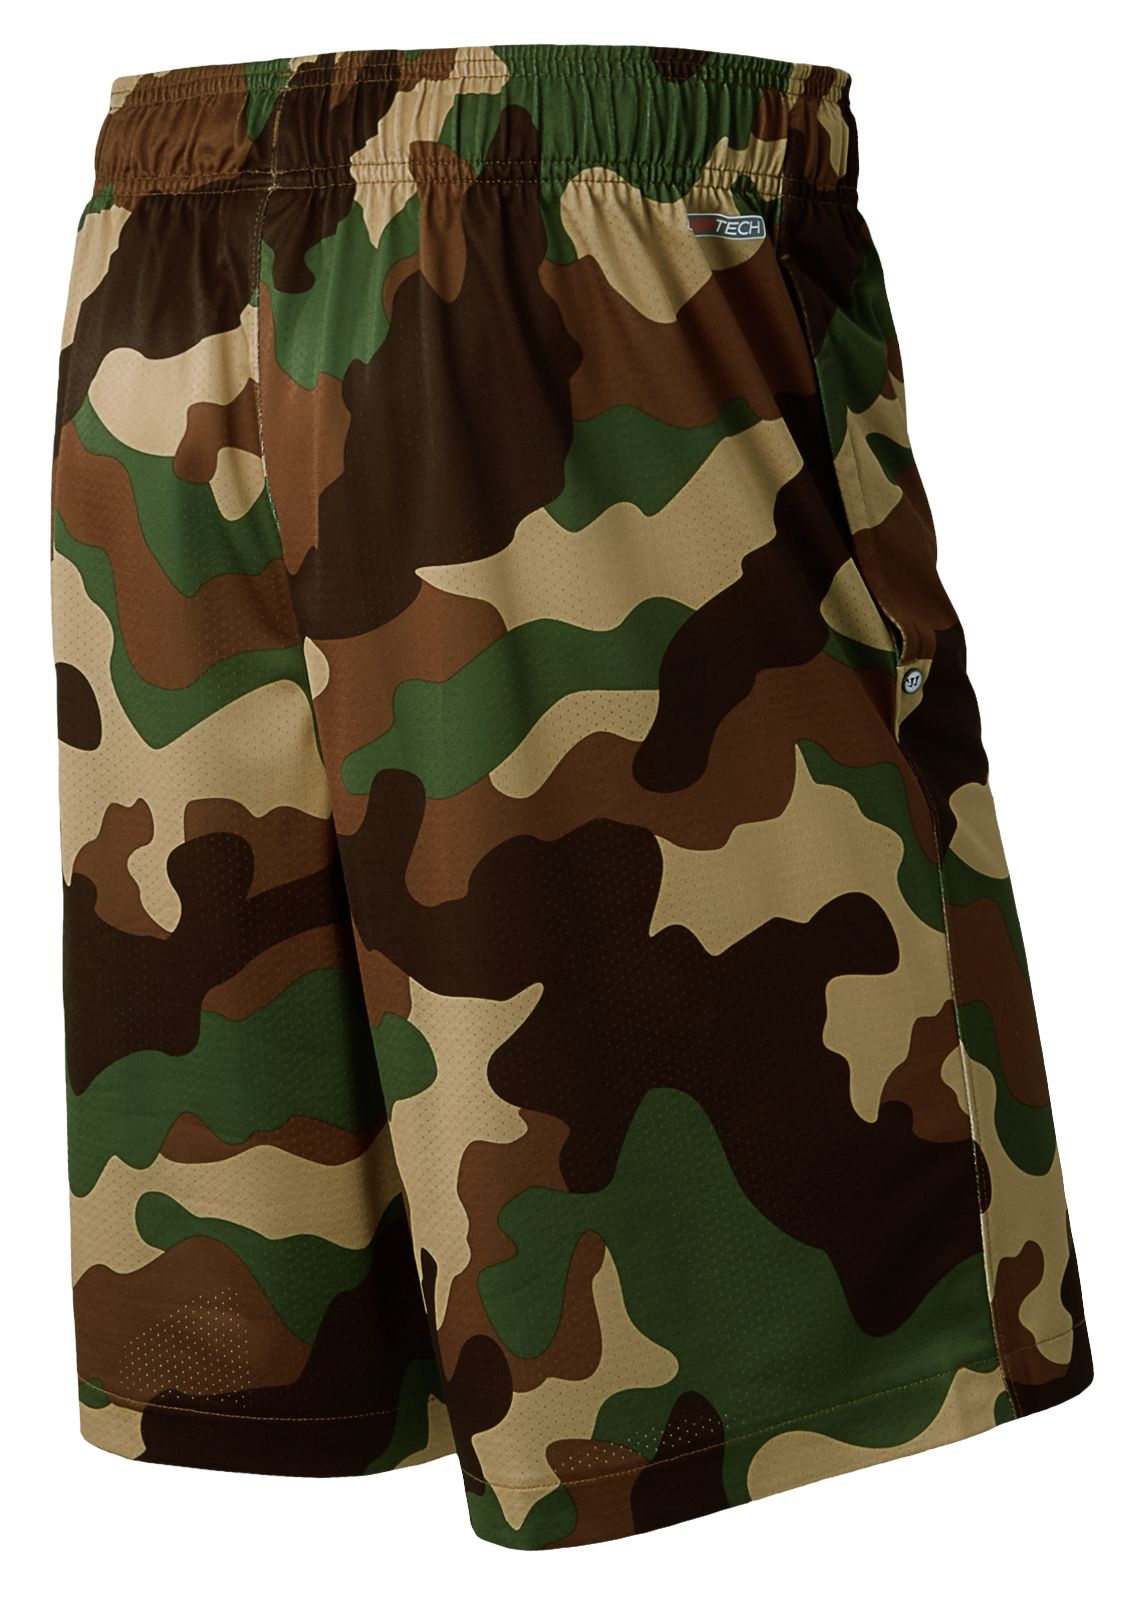 Camo Short, Green with Brown & Light Brown image number 0